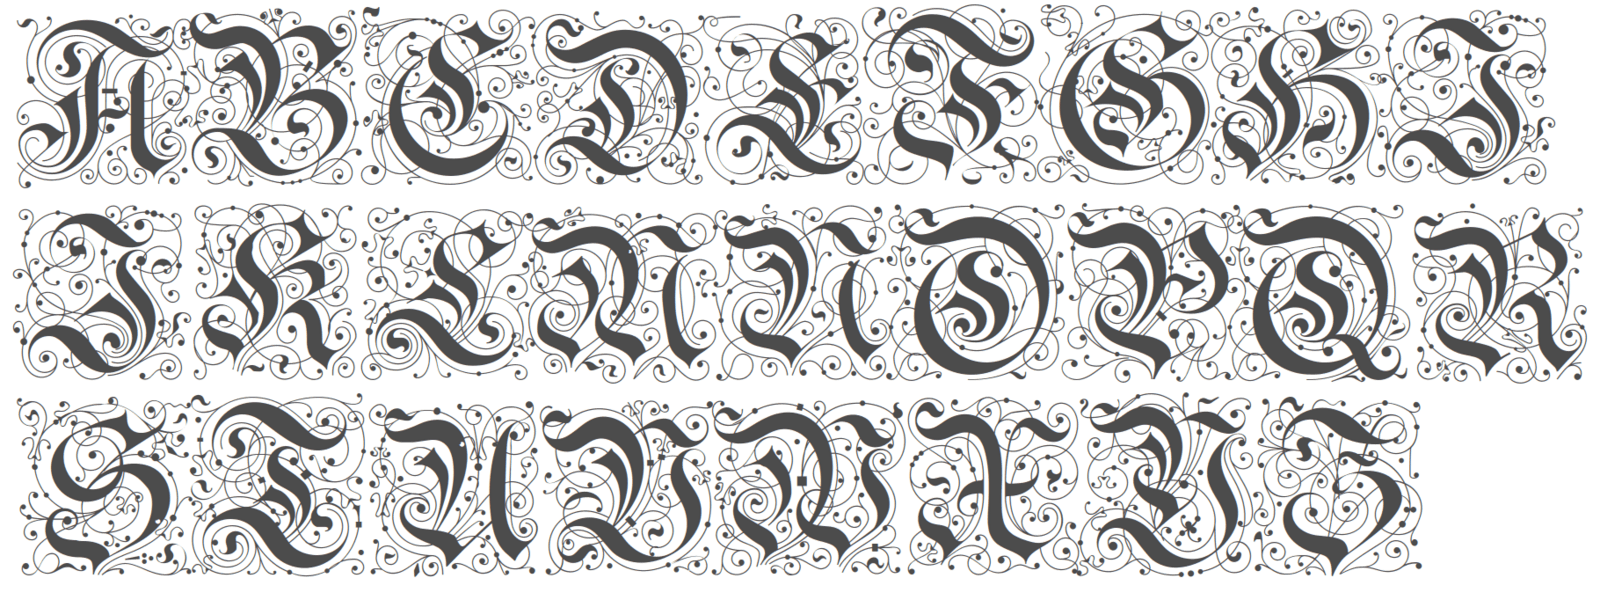 yinit (CTAN; test) is a hardcore old German blackletter fraktur font, with heavy emphasis on intricate calligraphic decoration.